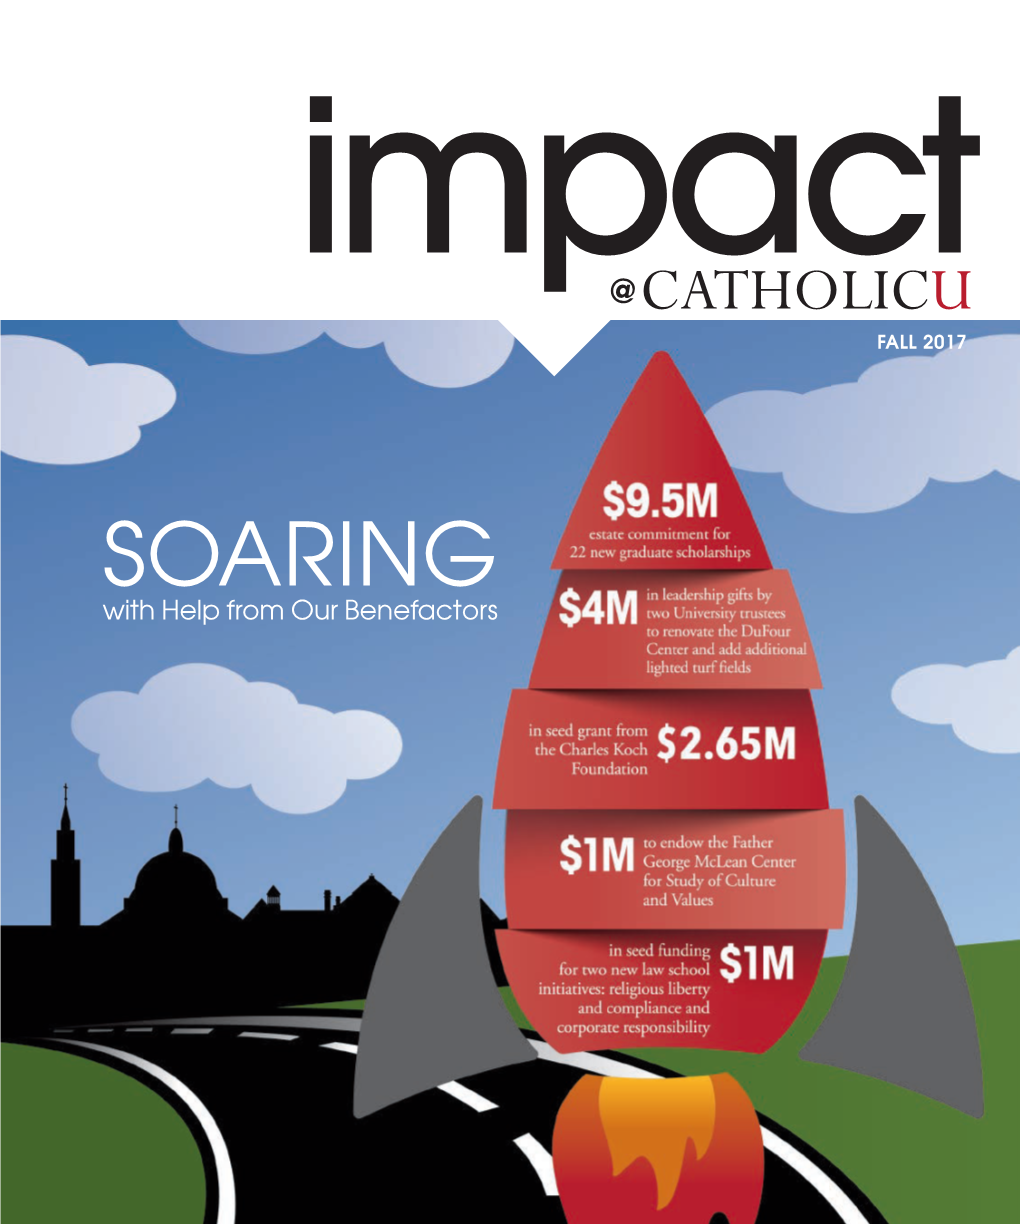 SOARING with Help from Our Benefactors a BIG IMPACT